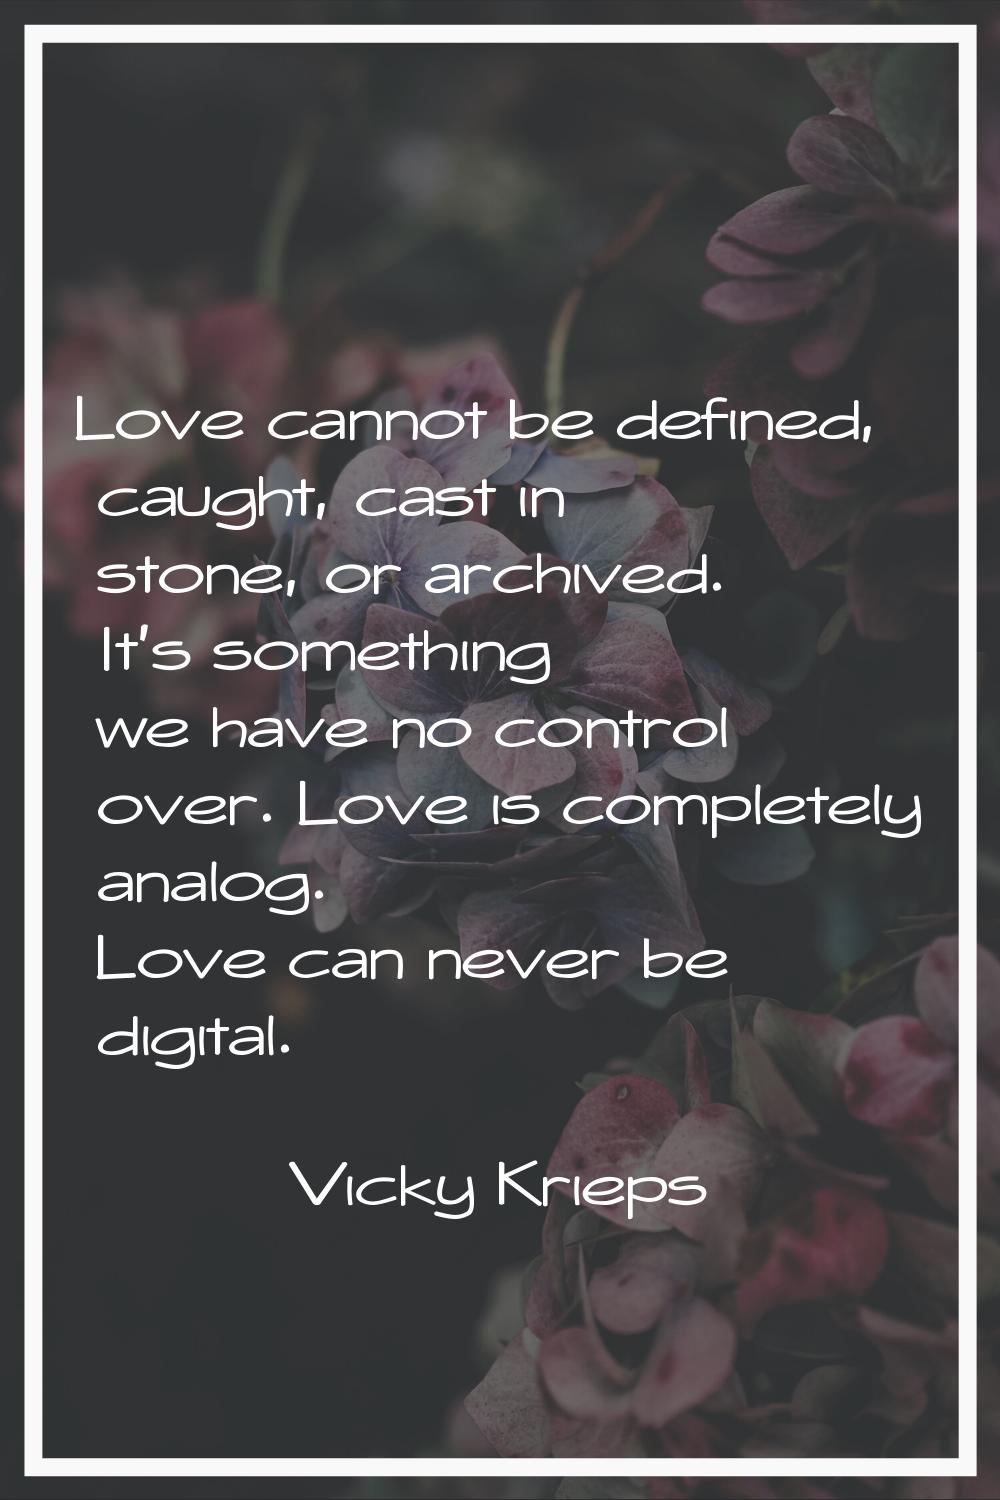 Love cannot be defined, caught, cast in stone, or archived. It's something we have no control over.